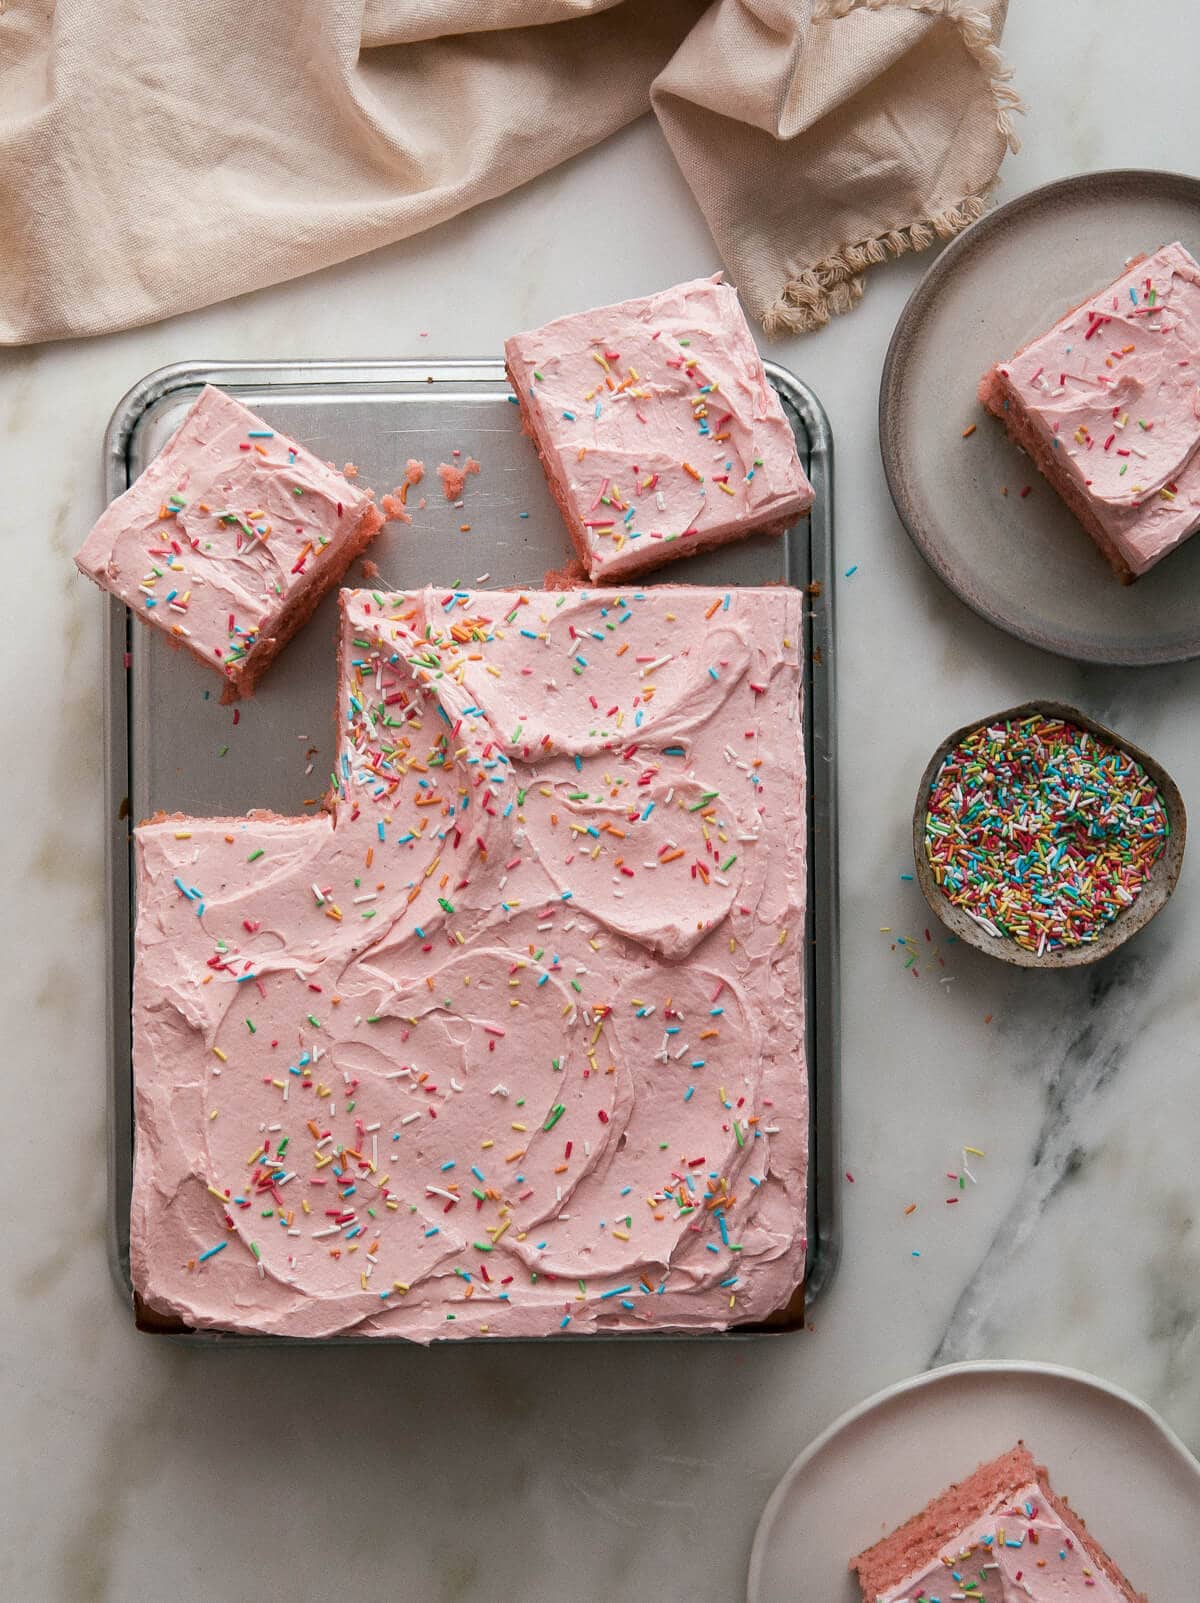 Strawberry Sheet Cake with Rhubarb Frosting